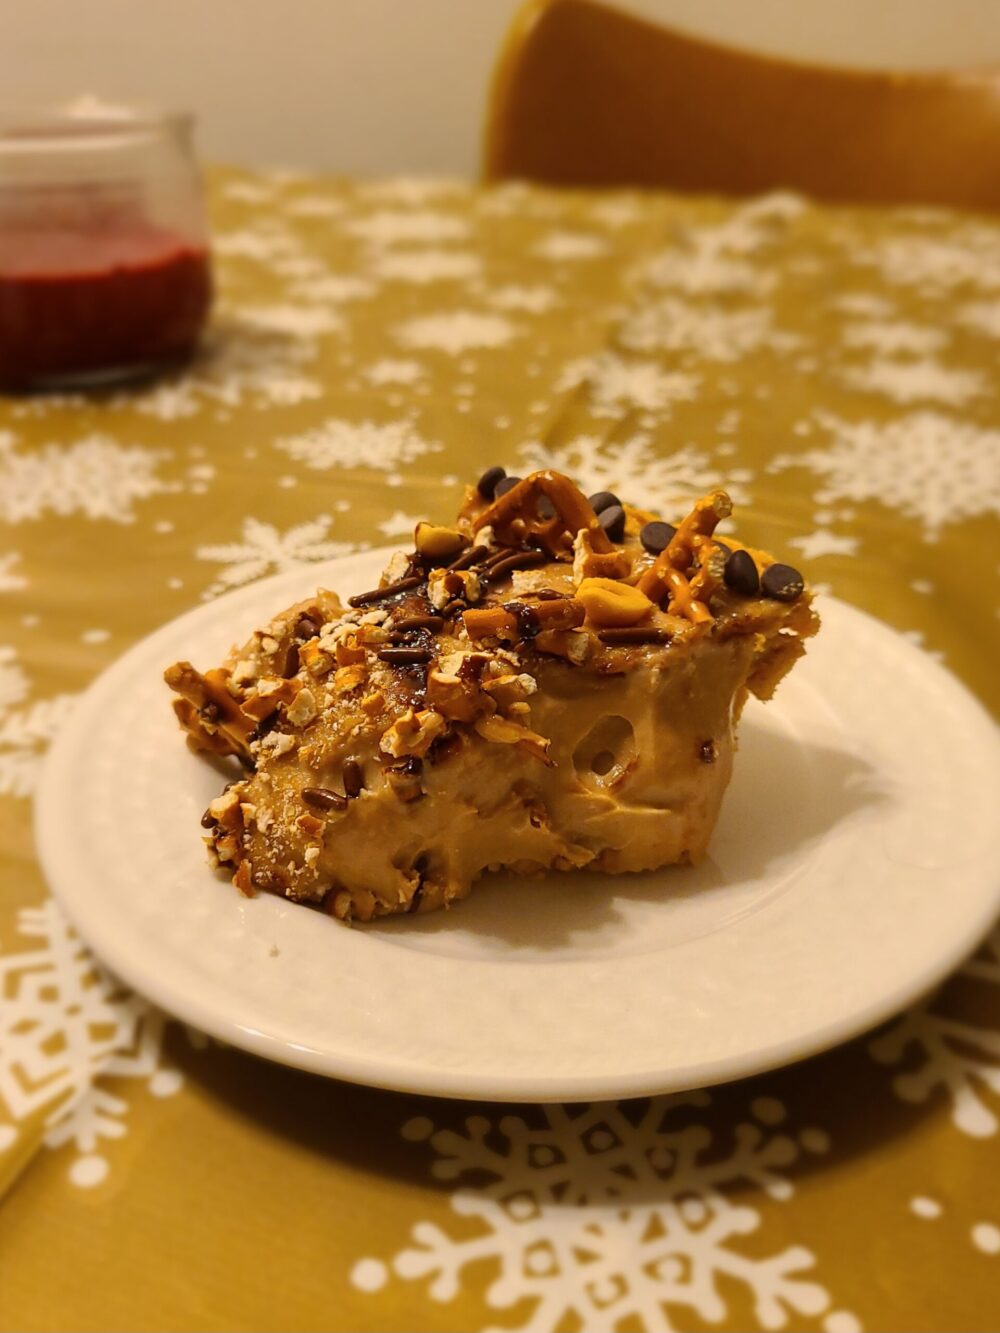 a slice of vegan chocolate peanut butter pretzel pie on a white plate against a tablecloth with snowflakes